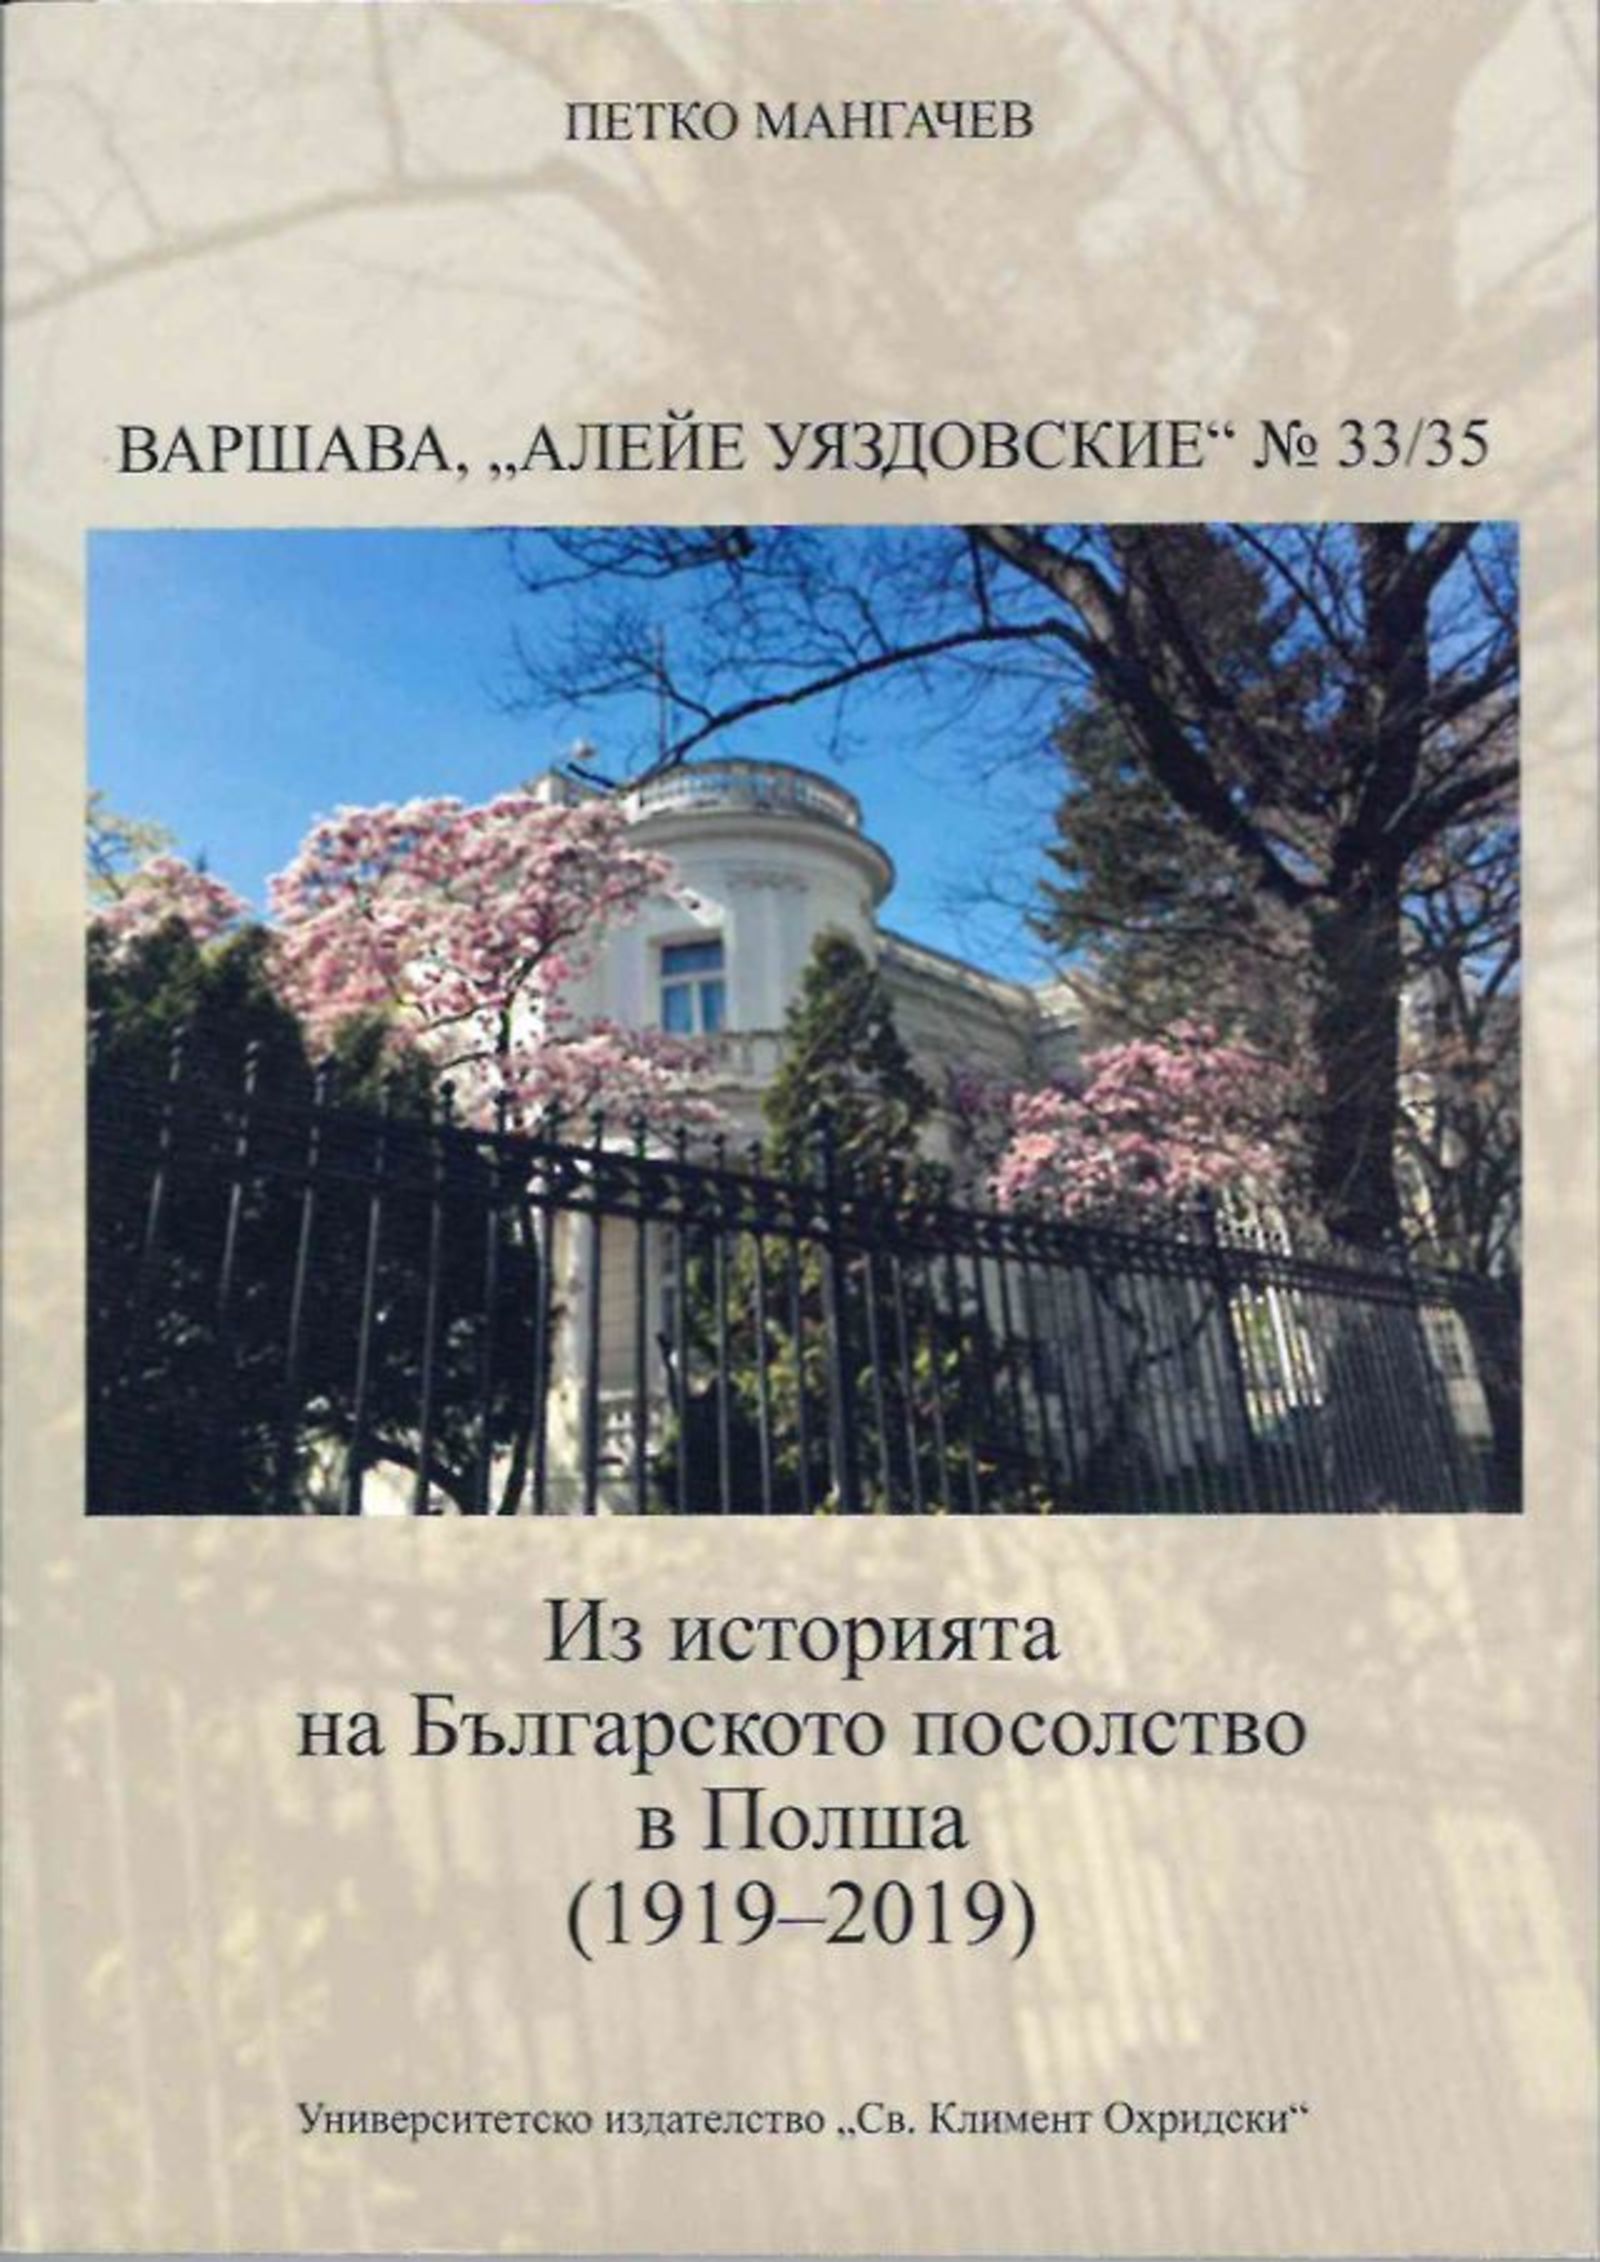  Presentation of a book about the Bulgarian embassy in Warsaw 